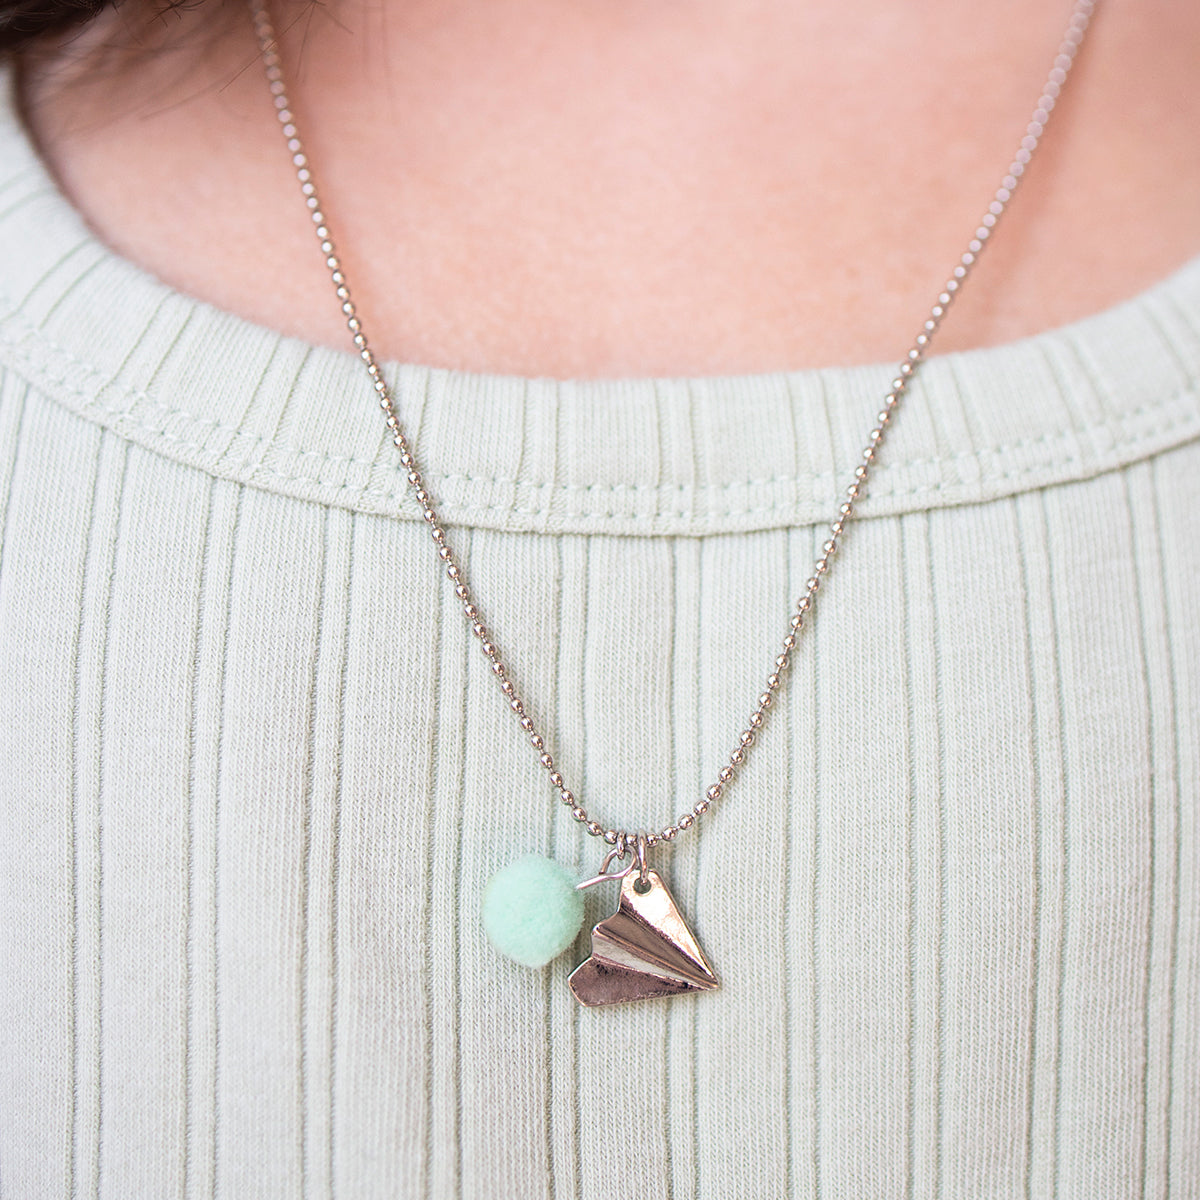 Emma Necklace - Silver Paper Airplane